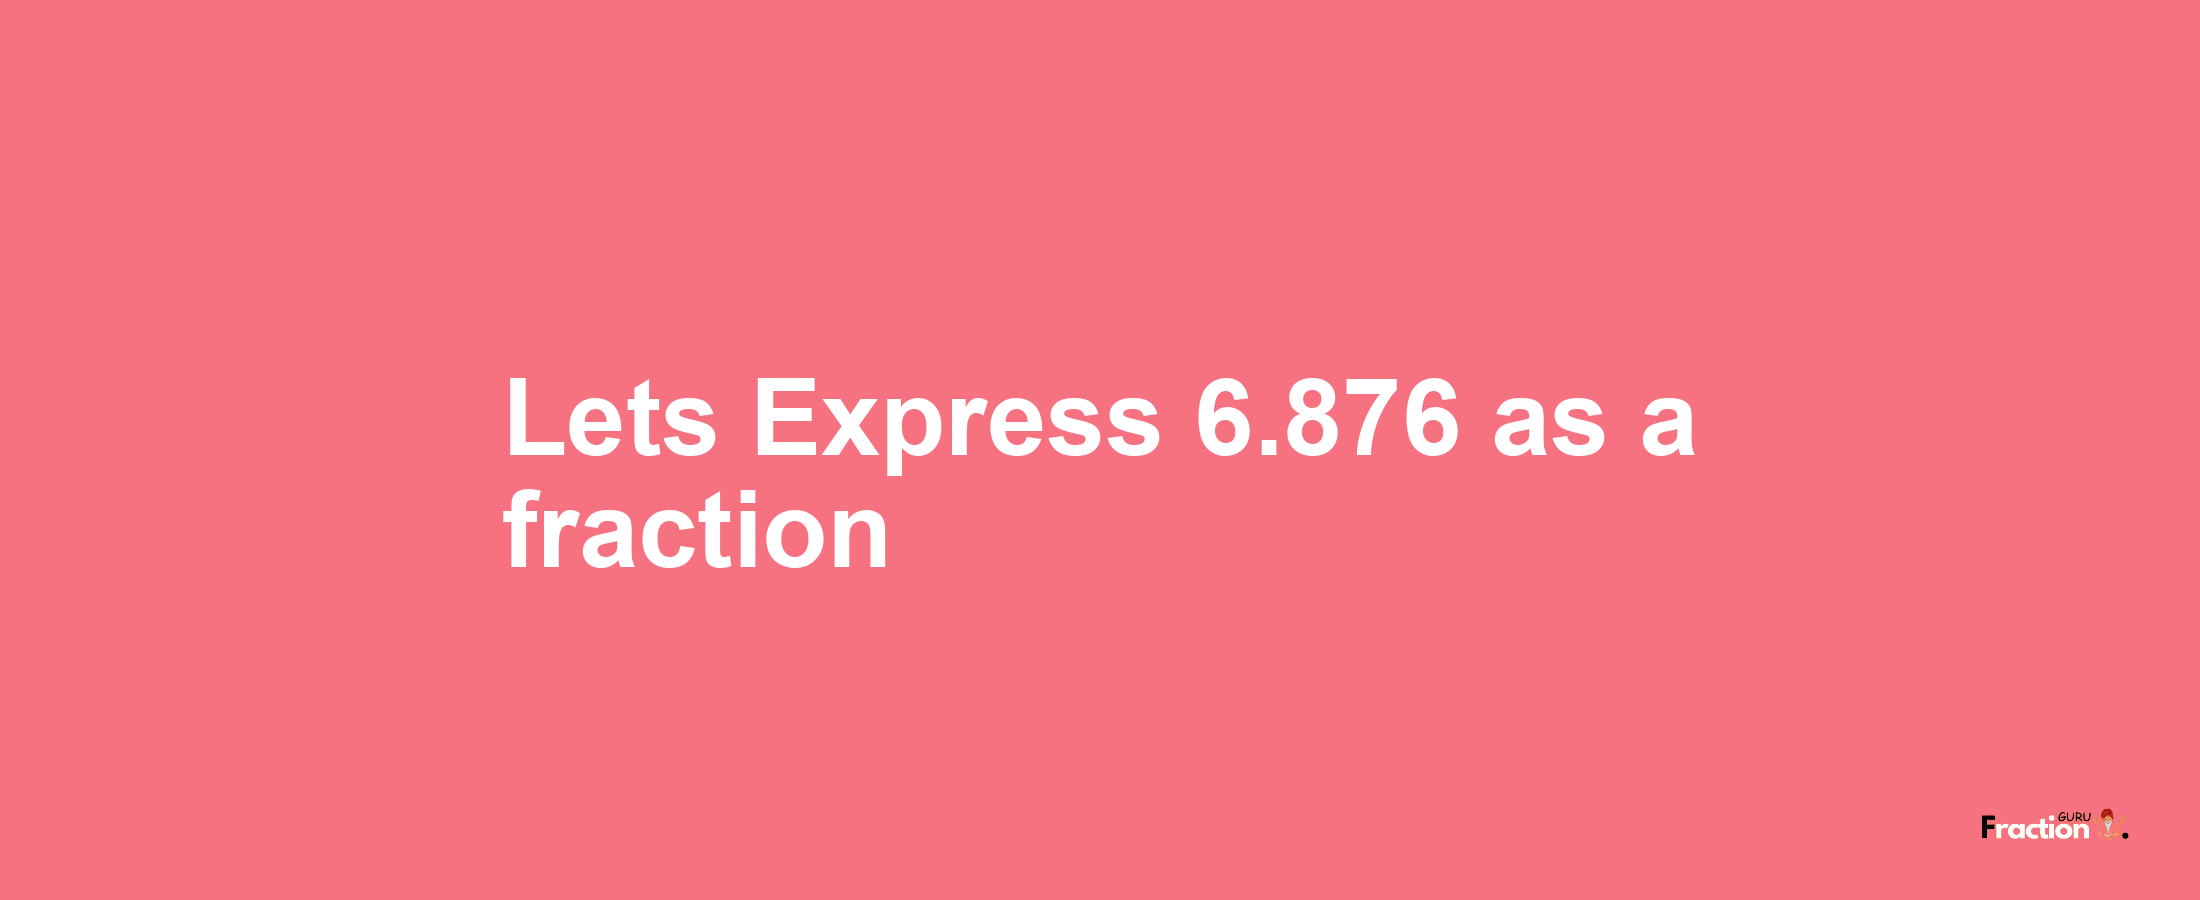 Lets Express 6.876 as afraction